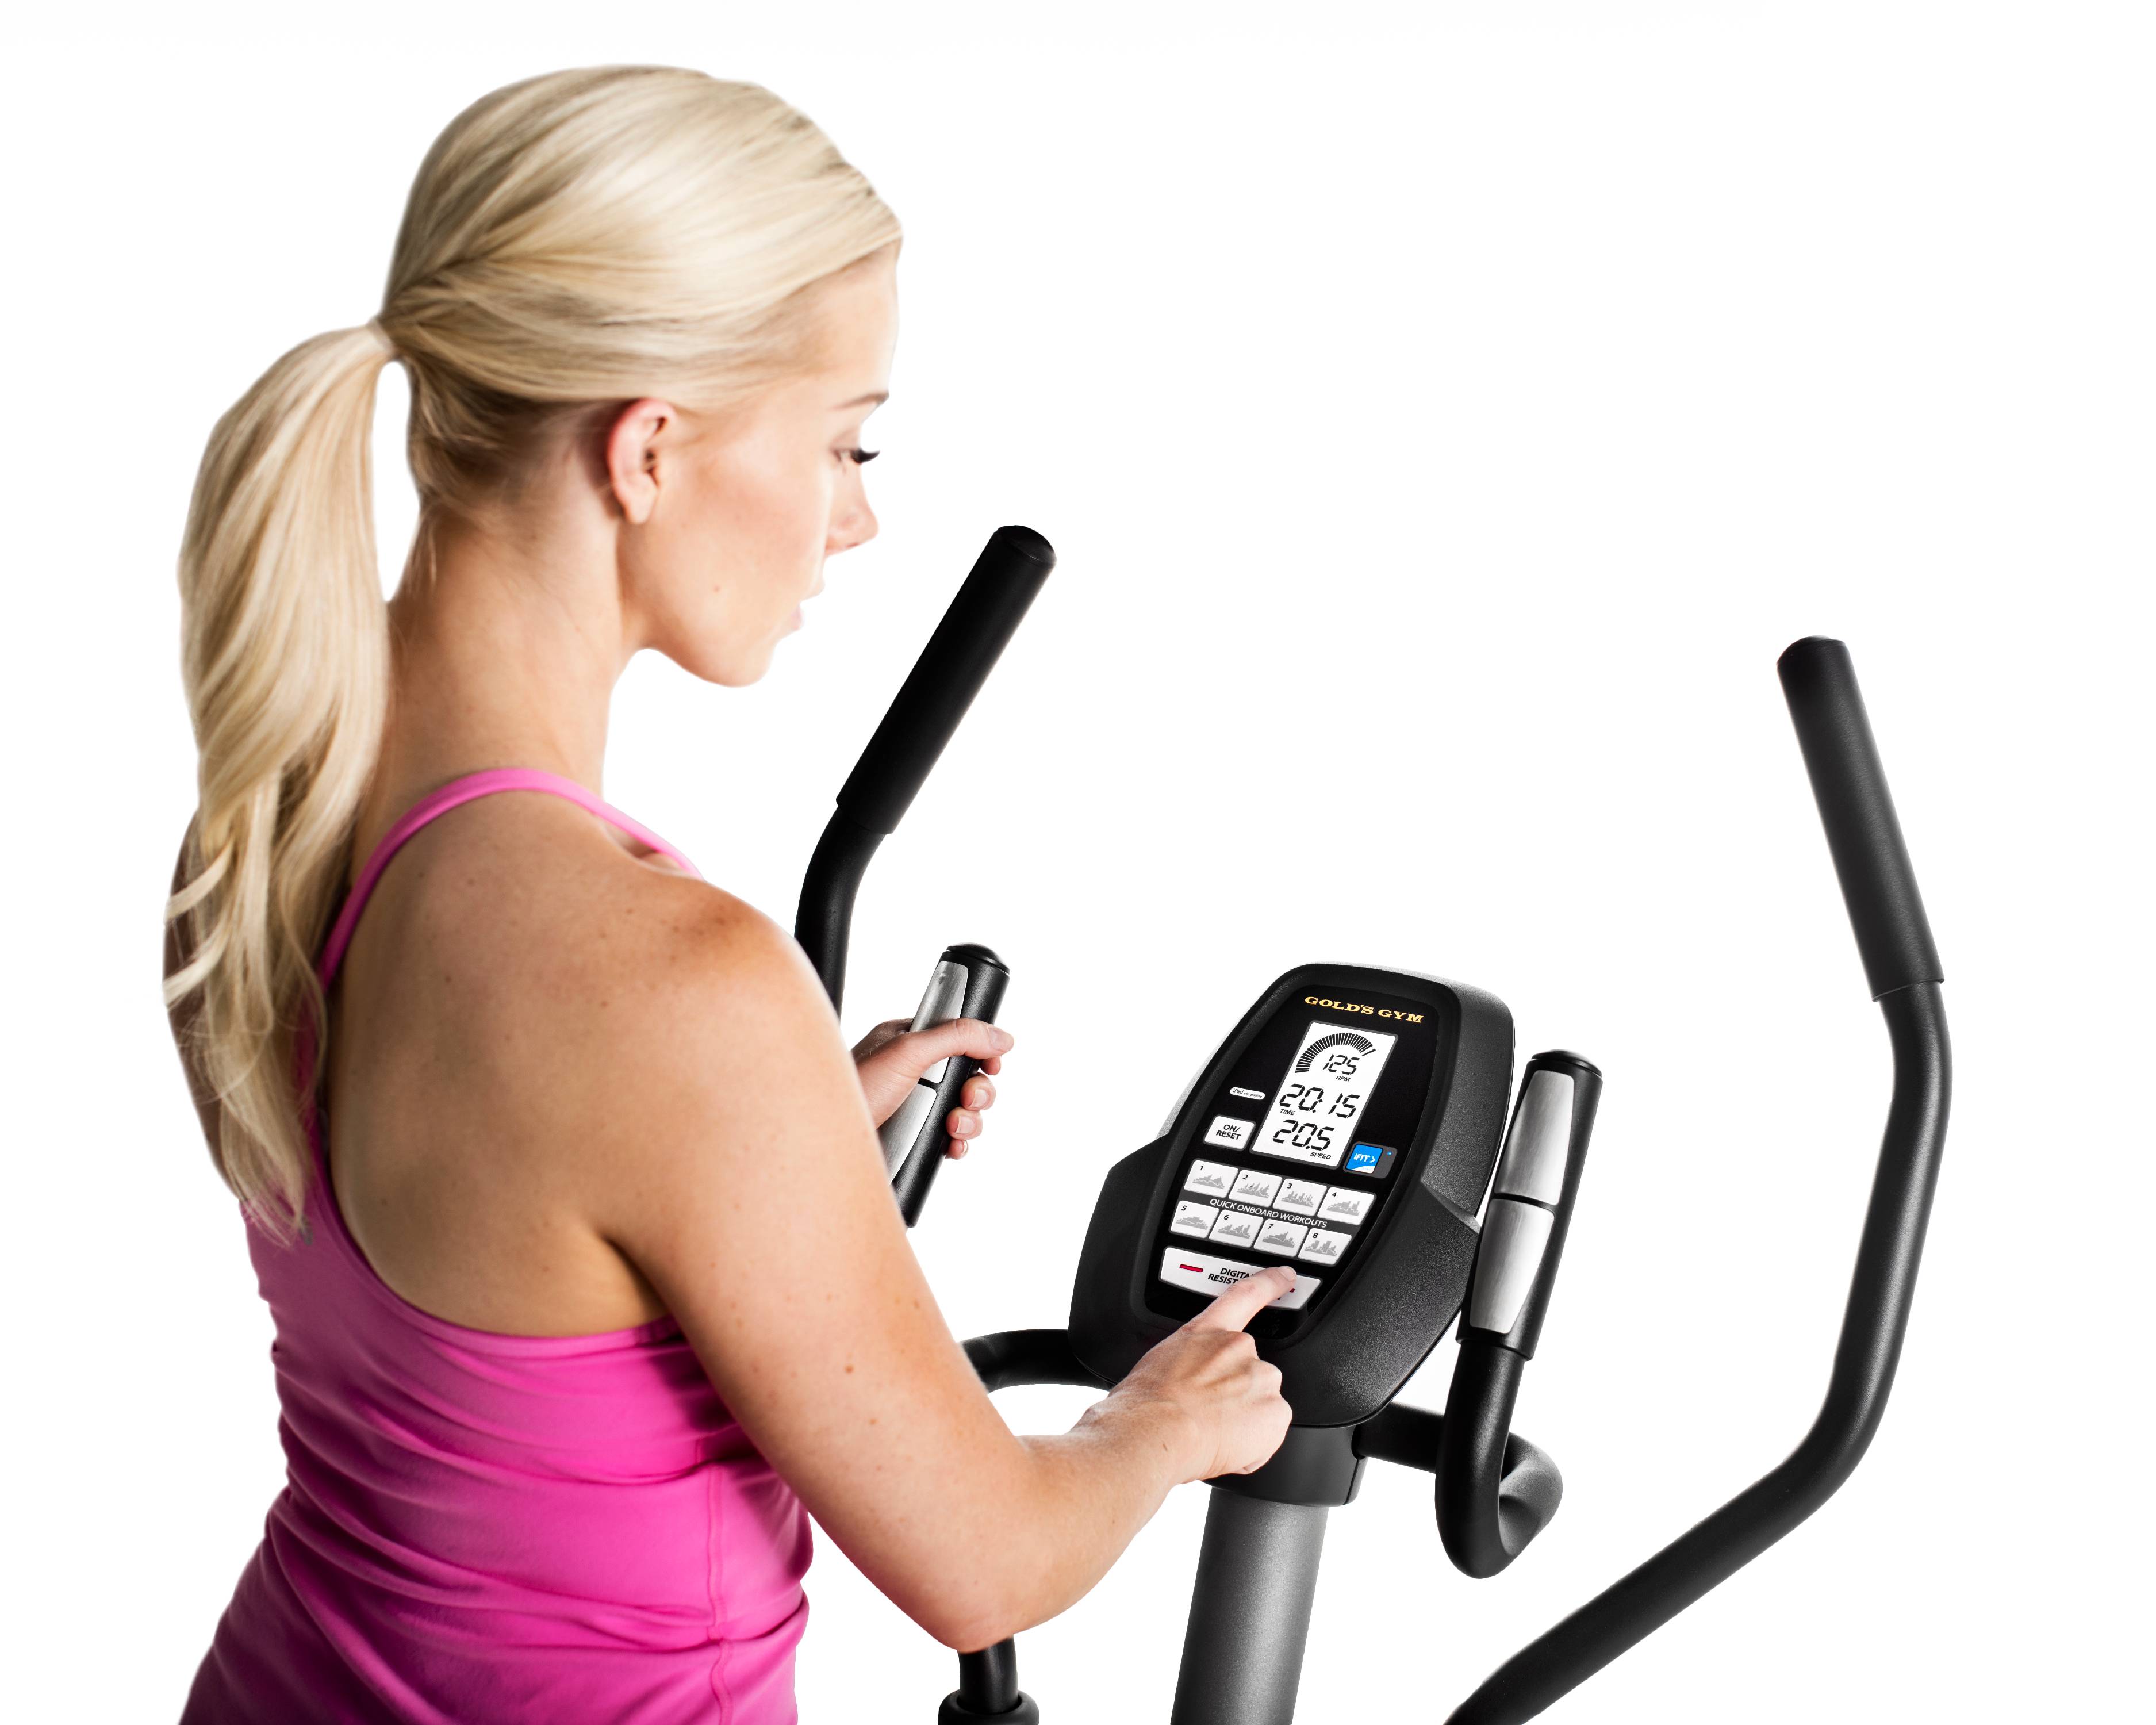 Gold's Gym Stride Trainer 380 Elliptical, iFit Coach Compatible - image 9 of 9